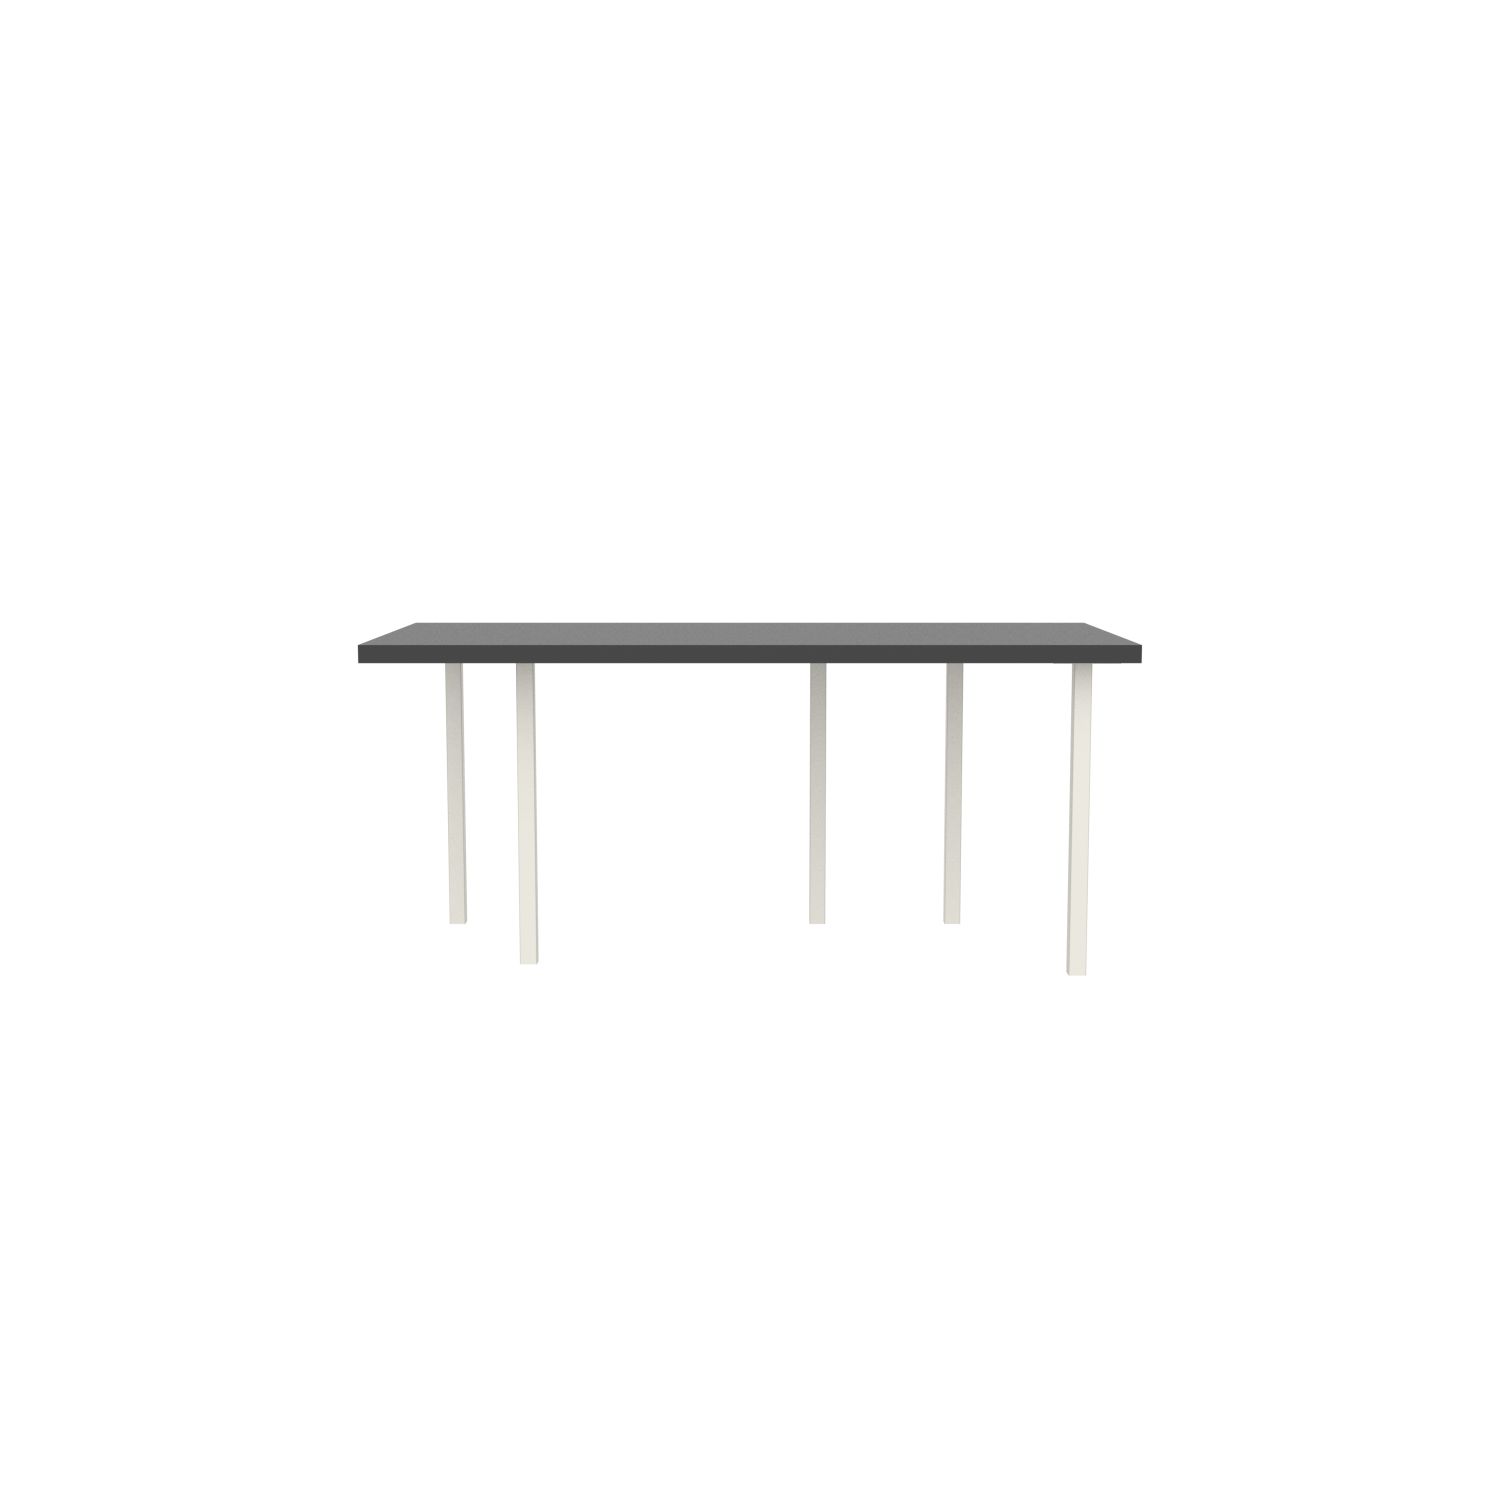 lensvelt bbrand table five fixed heigt 80x172 hpl black 50 mm price level 1 white ral9010